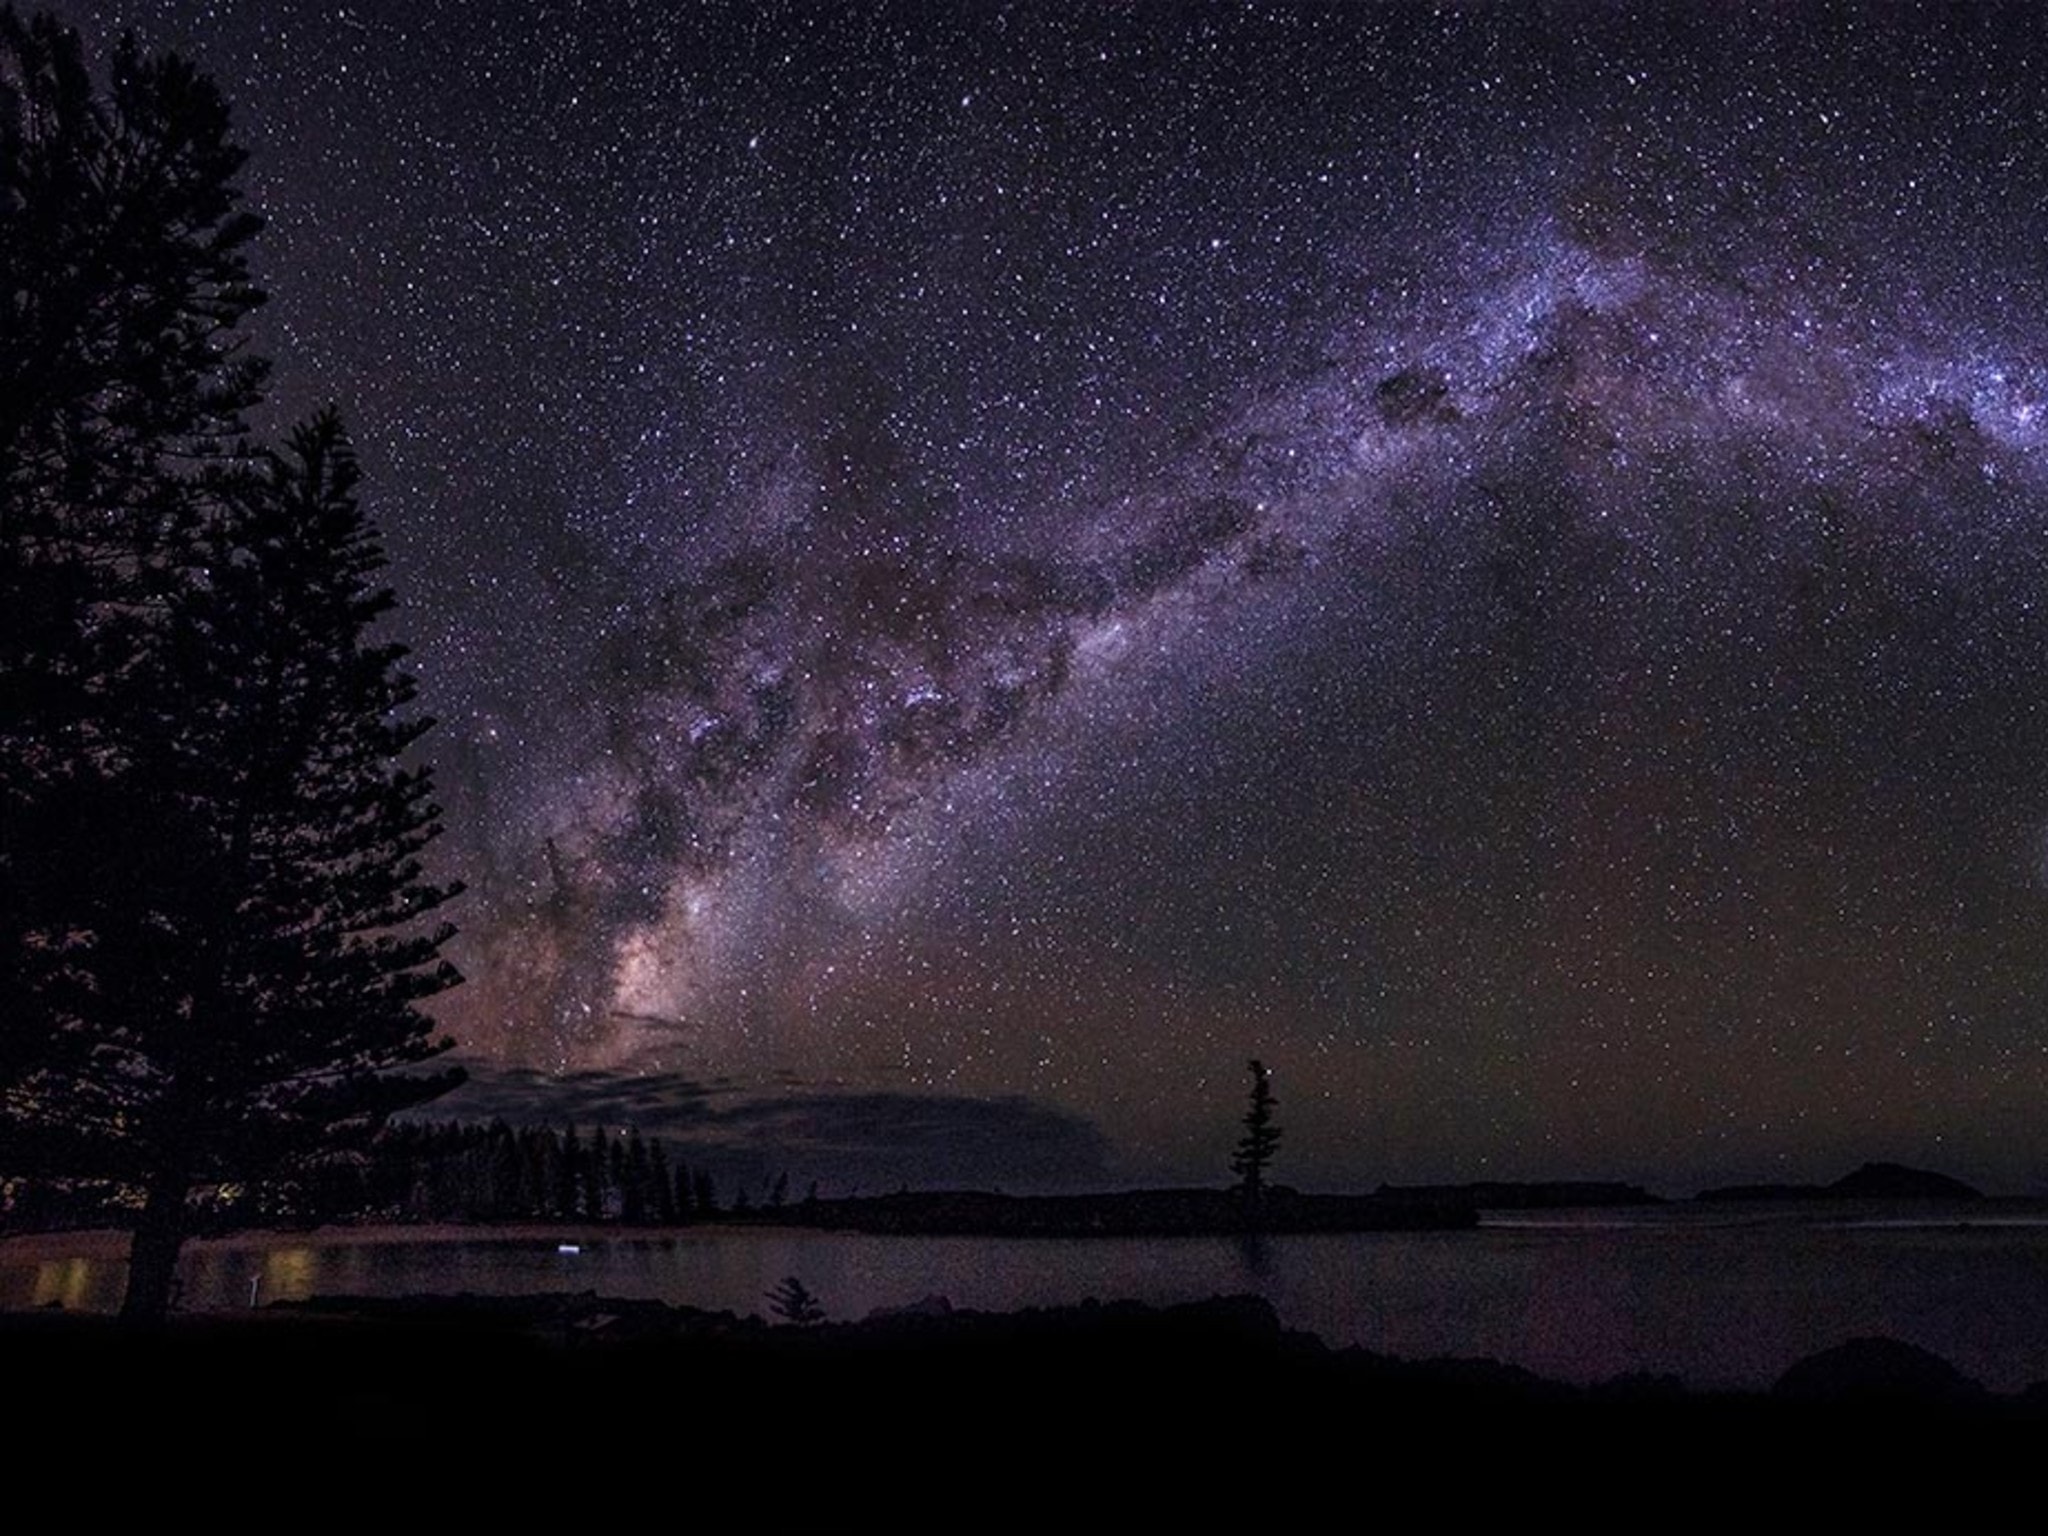 Julie Hartwig Norfolk Island 2018 A 5 Shot Panorama Reveals The Milky Way In All Its Glory